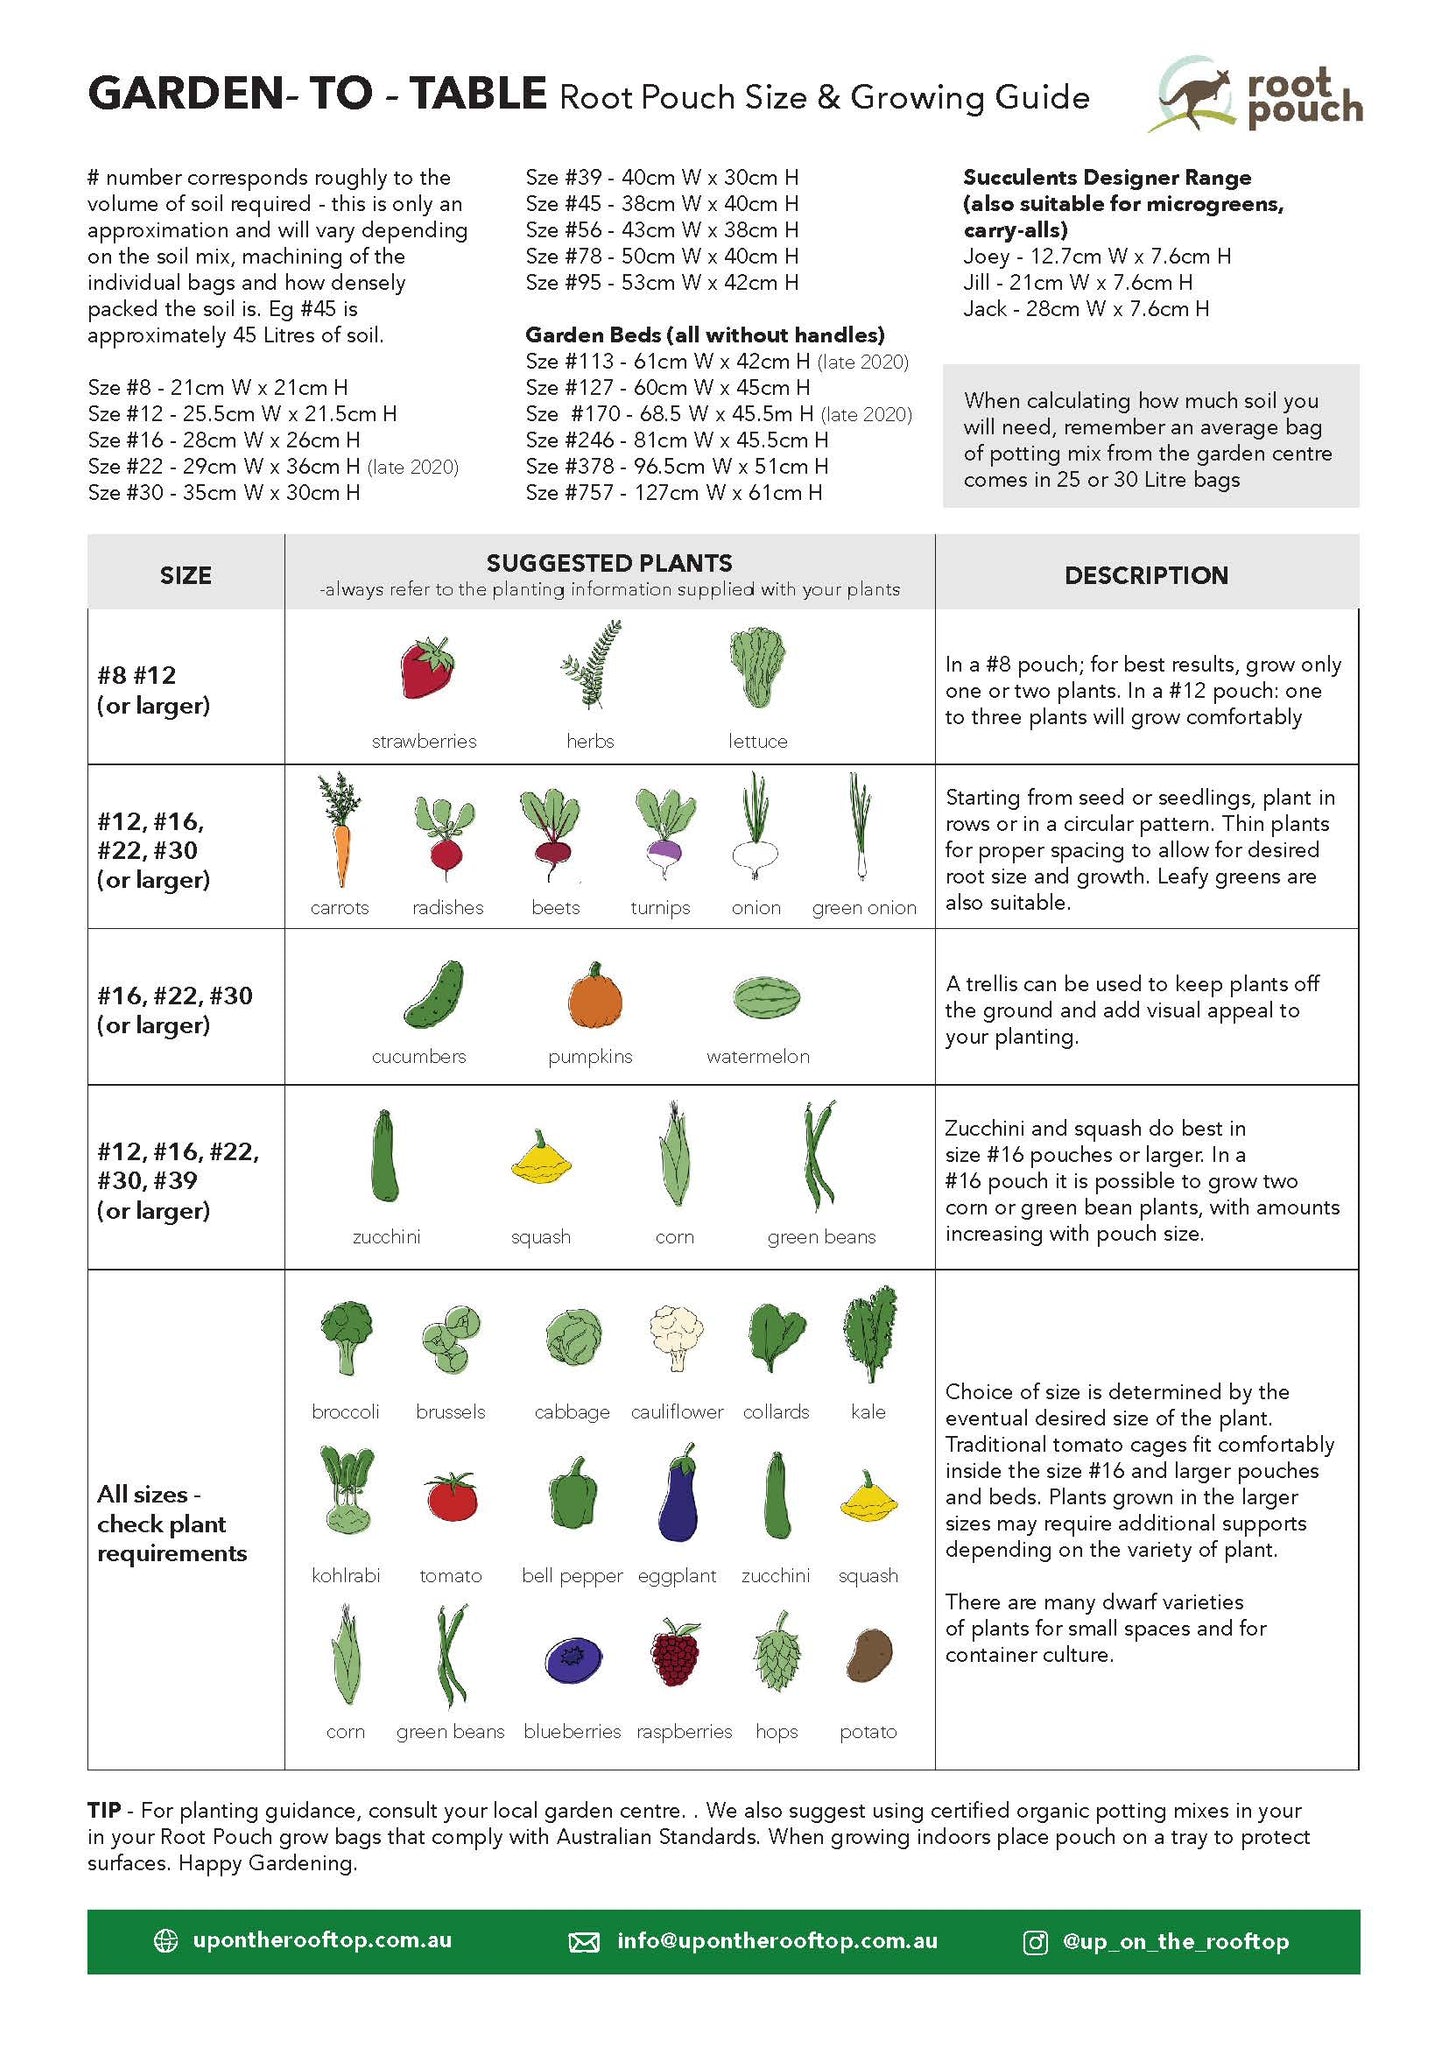 Root Pouch Garden To Table Size Guide - Up On The Rooftop